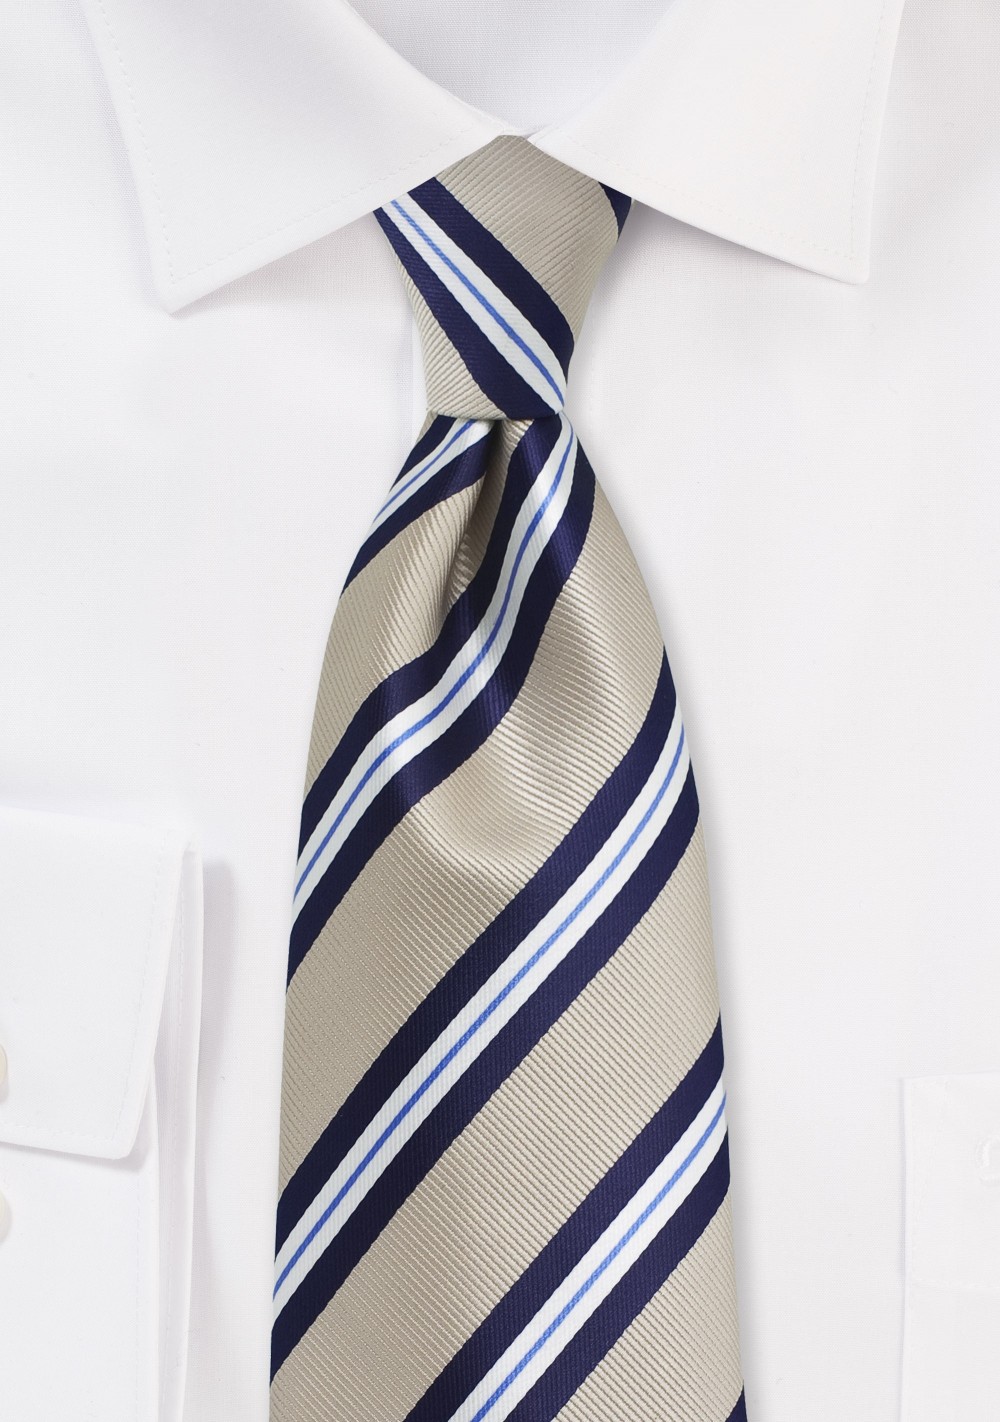 Repp Striped XL Length Tie in Beige and Navy